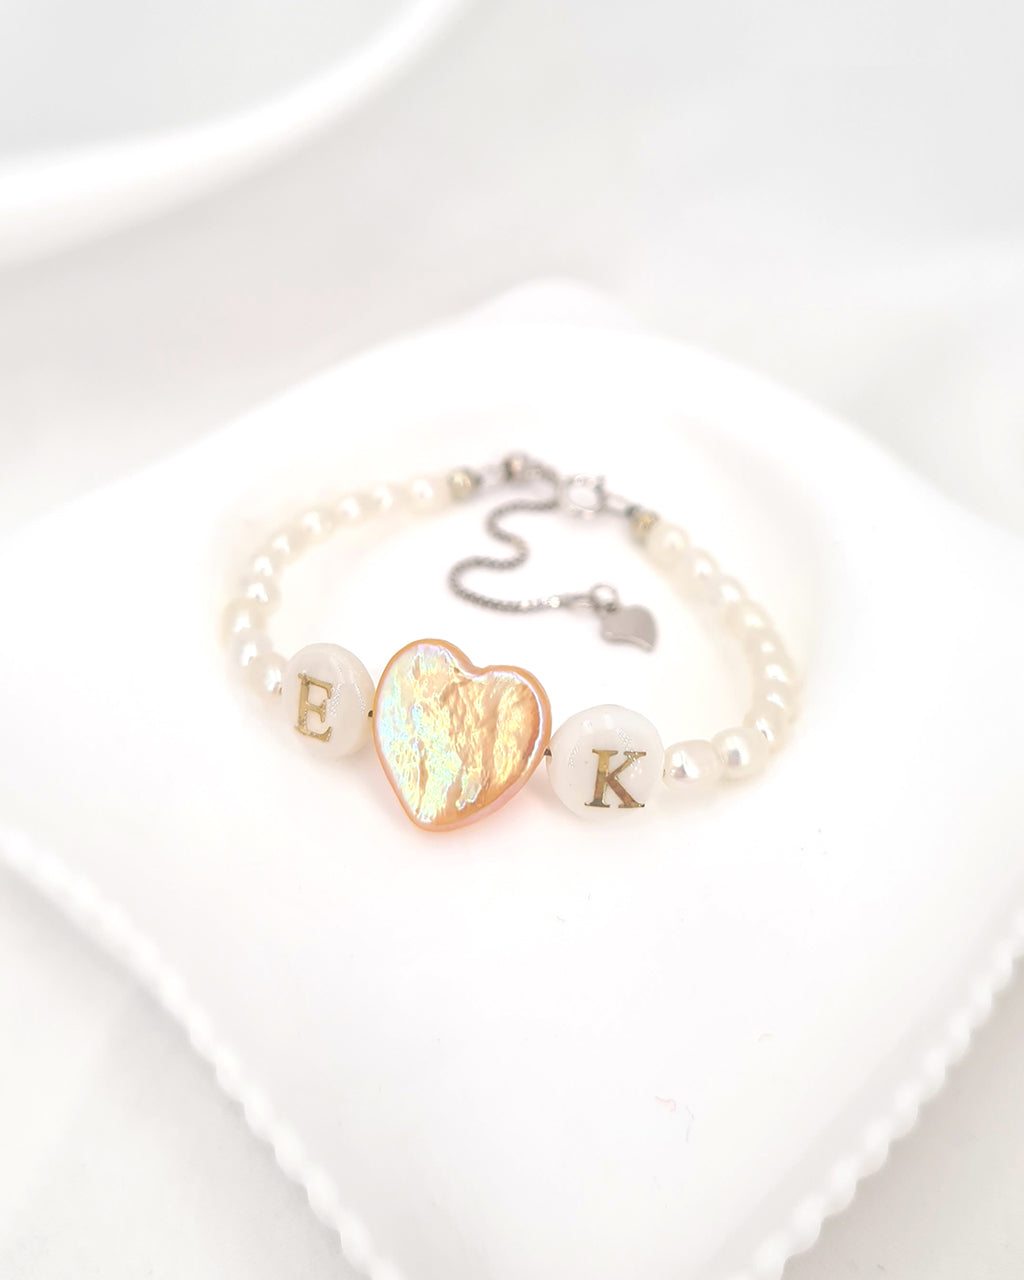 Personalised Letter Bracelet with Heart Pearl, gifts for her, girls Children Birthday Party Favors Singapore